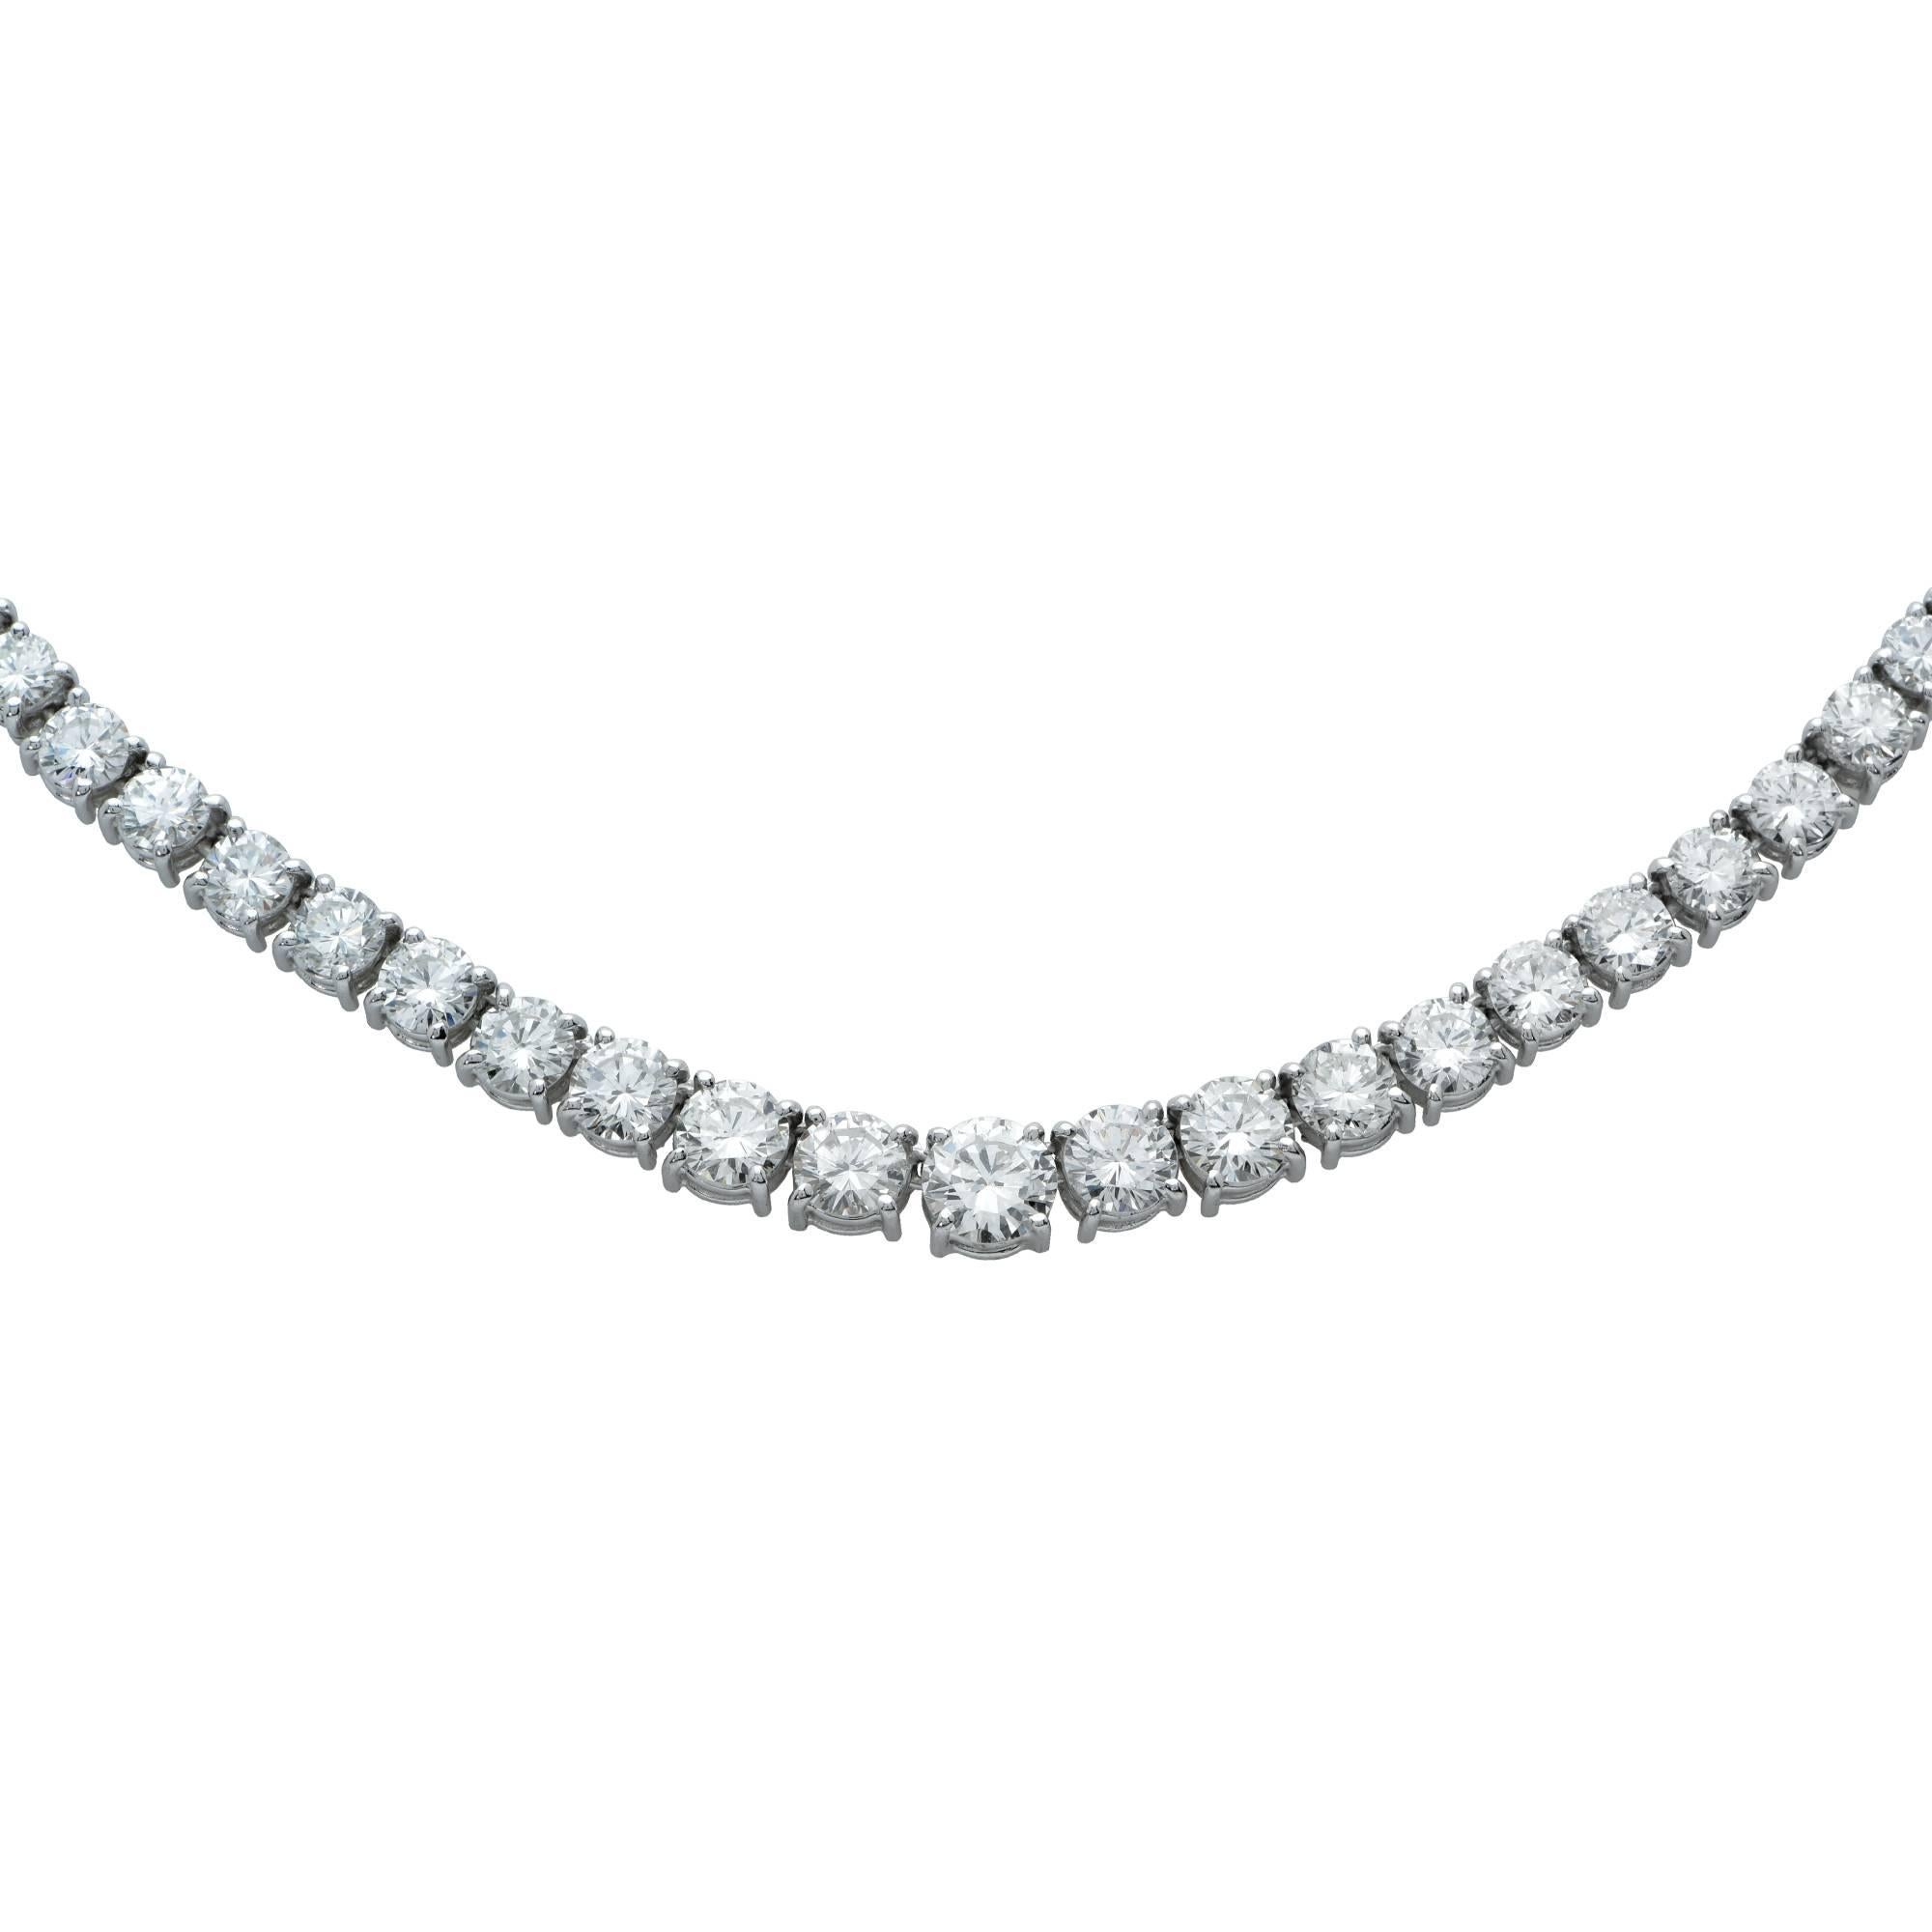 Platinum diamond necklace containing 106  round brilliant cut diamonds weighing approximately 15.50cts F-G color VS clarity. This graduated diamond necklace is a stunning addition to any jewelry collection.

The necklace measures 16 inches.
It is